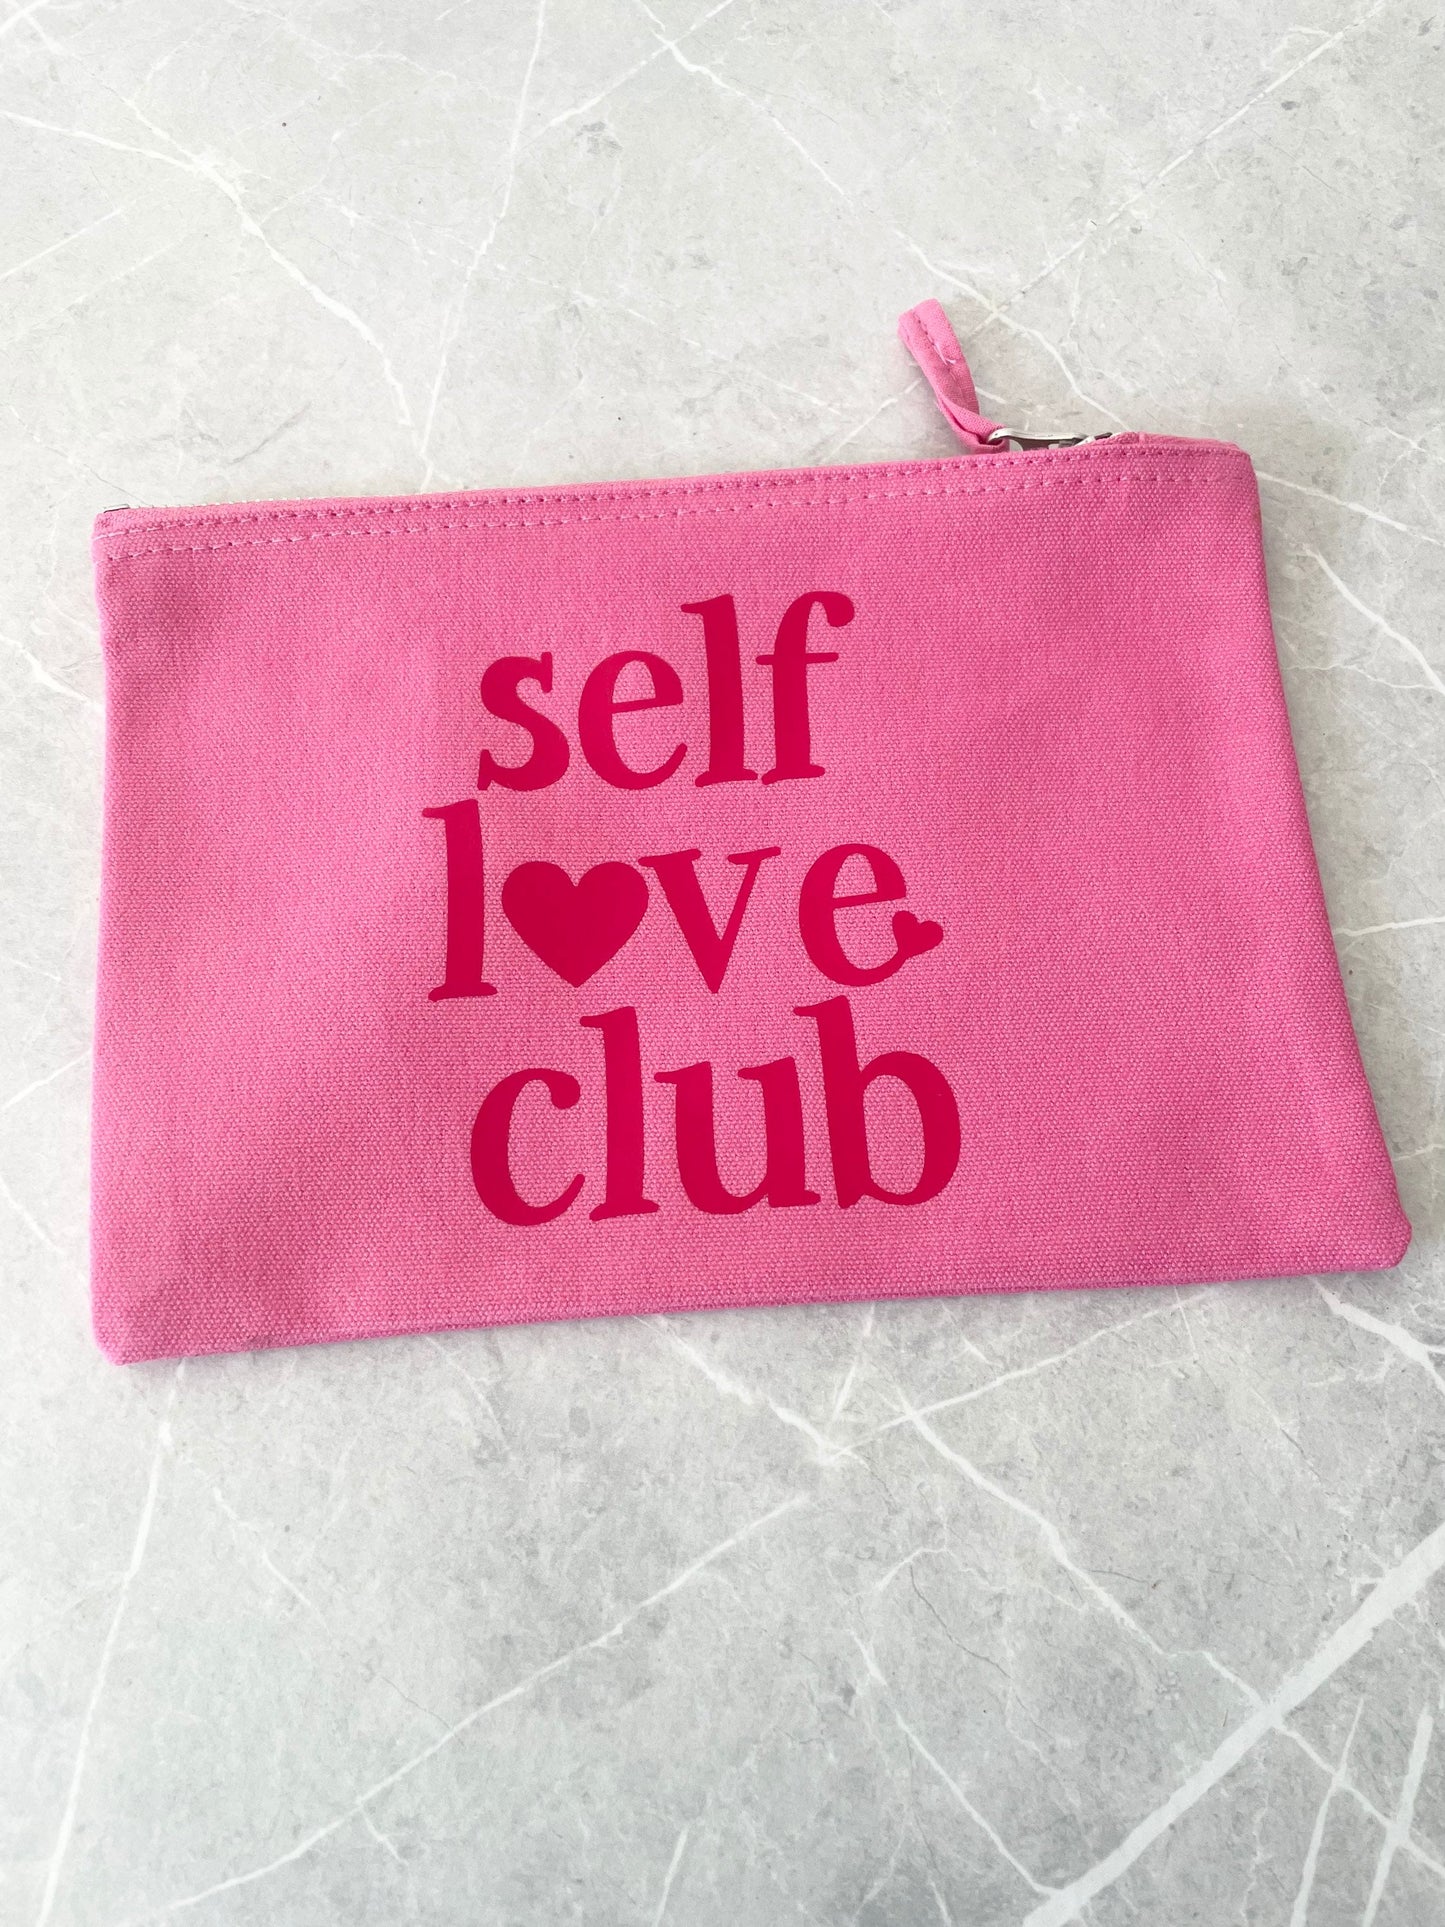 Self love club pouch, positivity gift, make up case, self care kit, friend birthday gift, work wife bestie present